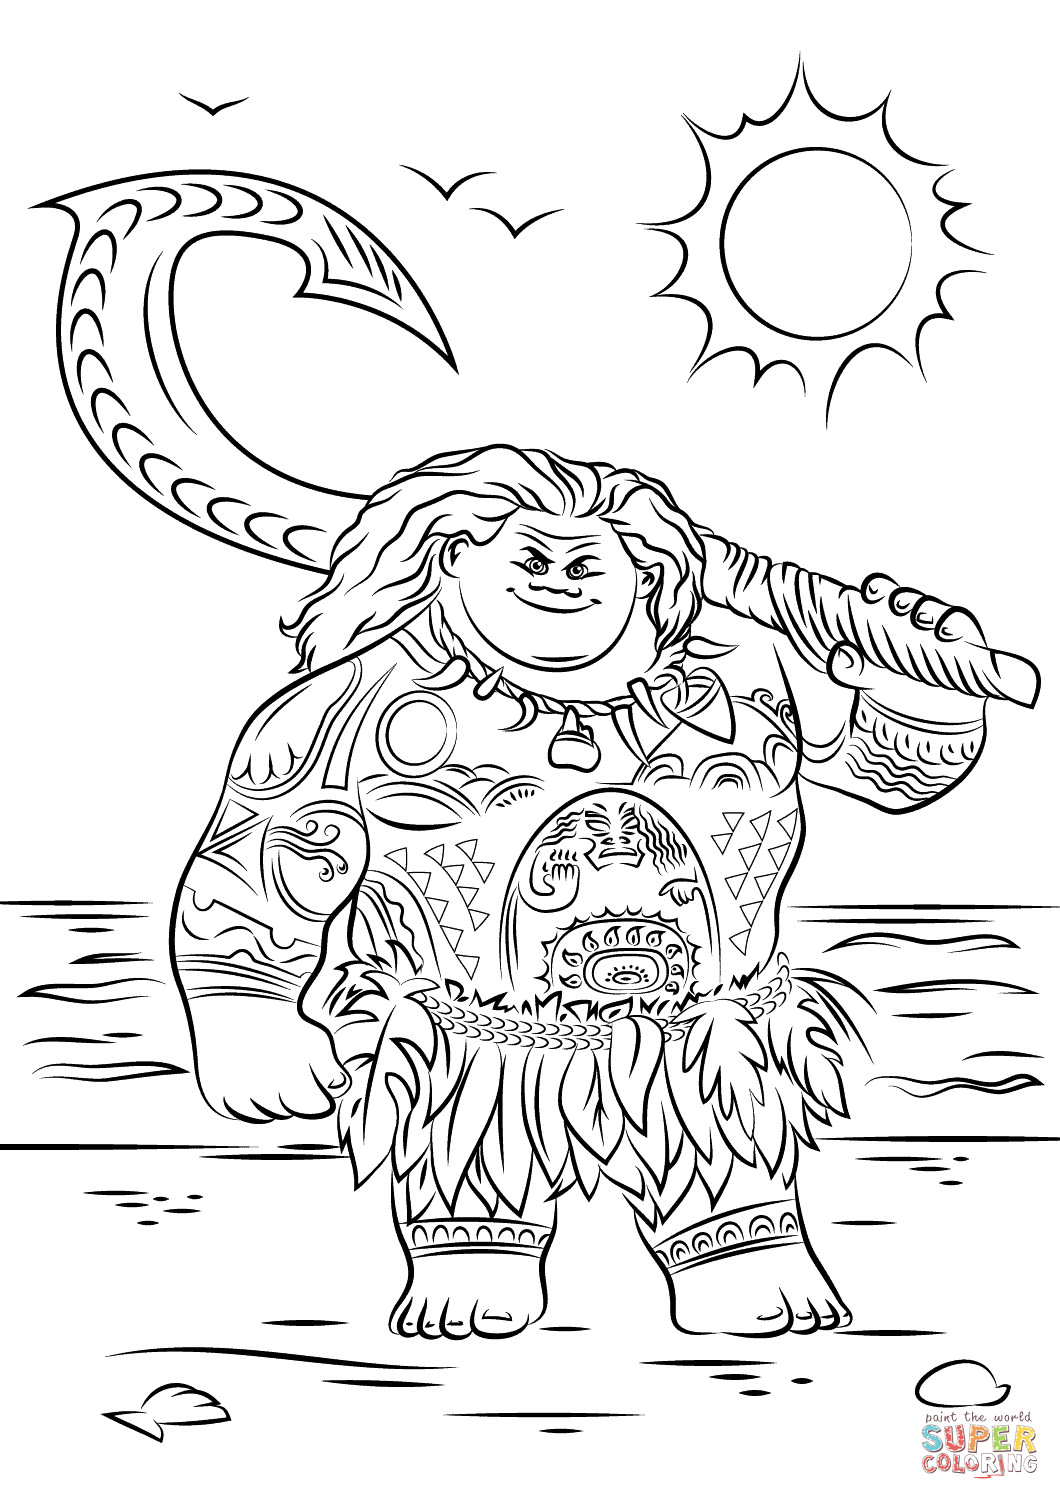 Online Printable Coloring Pages
 Maui From Moana Coloring Page